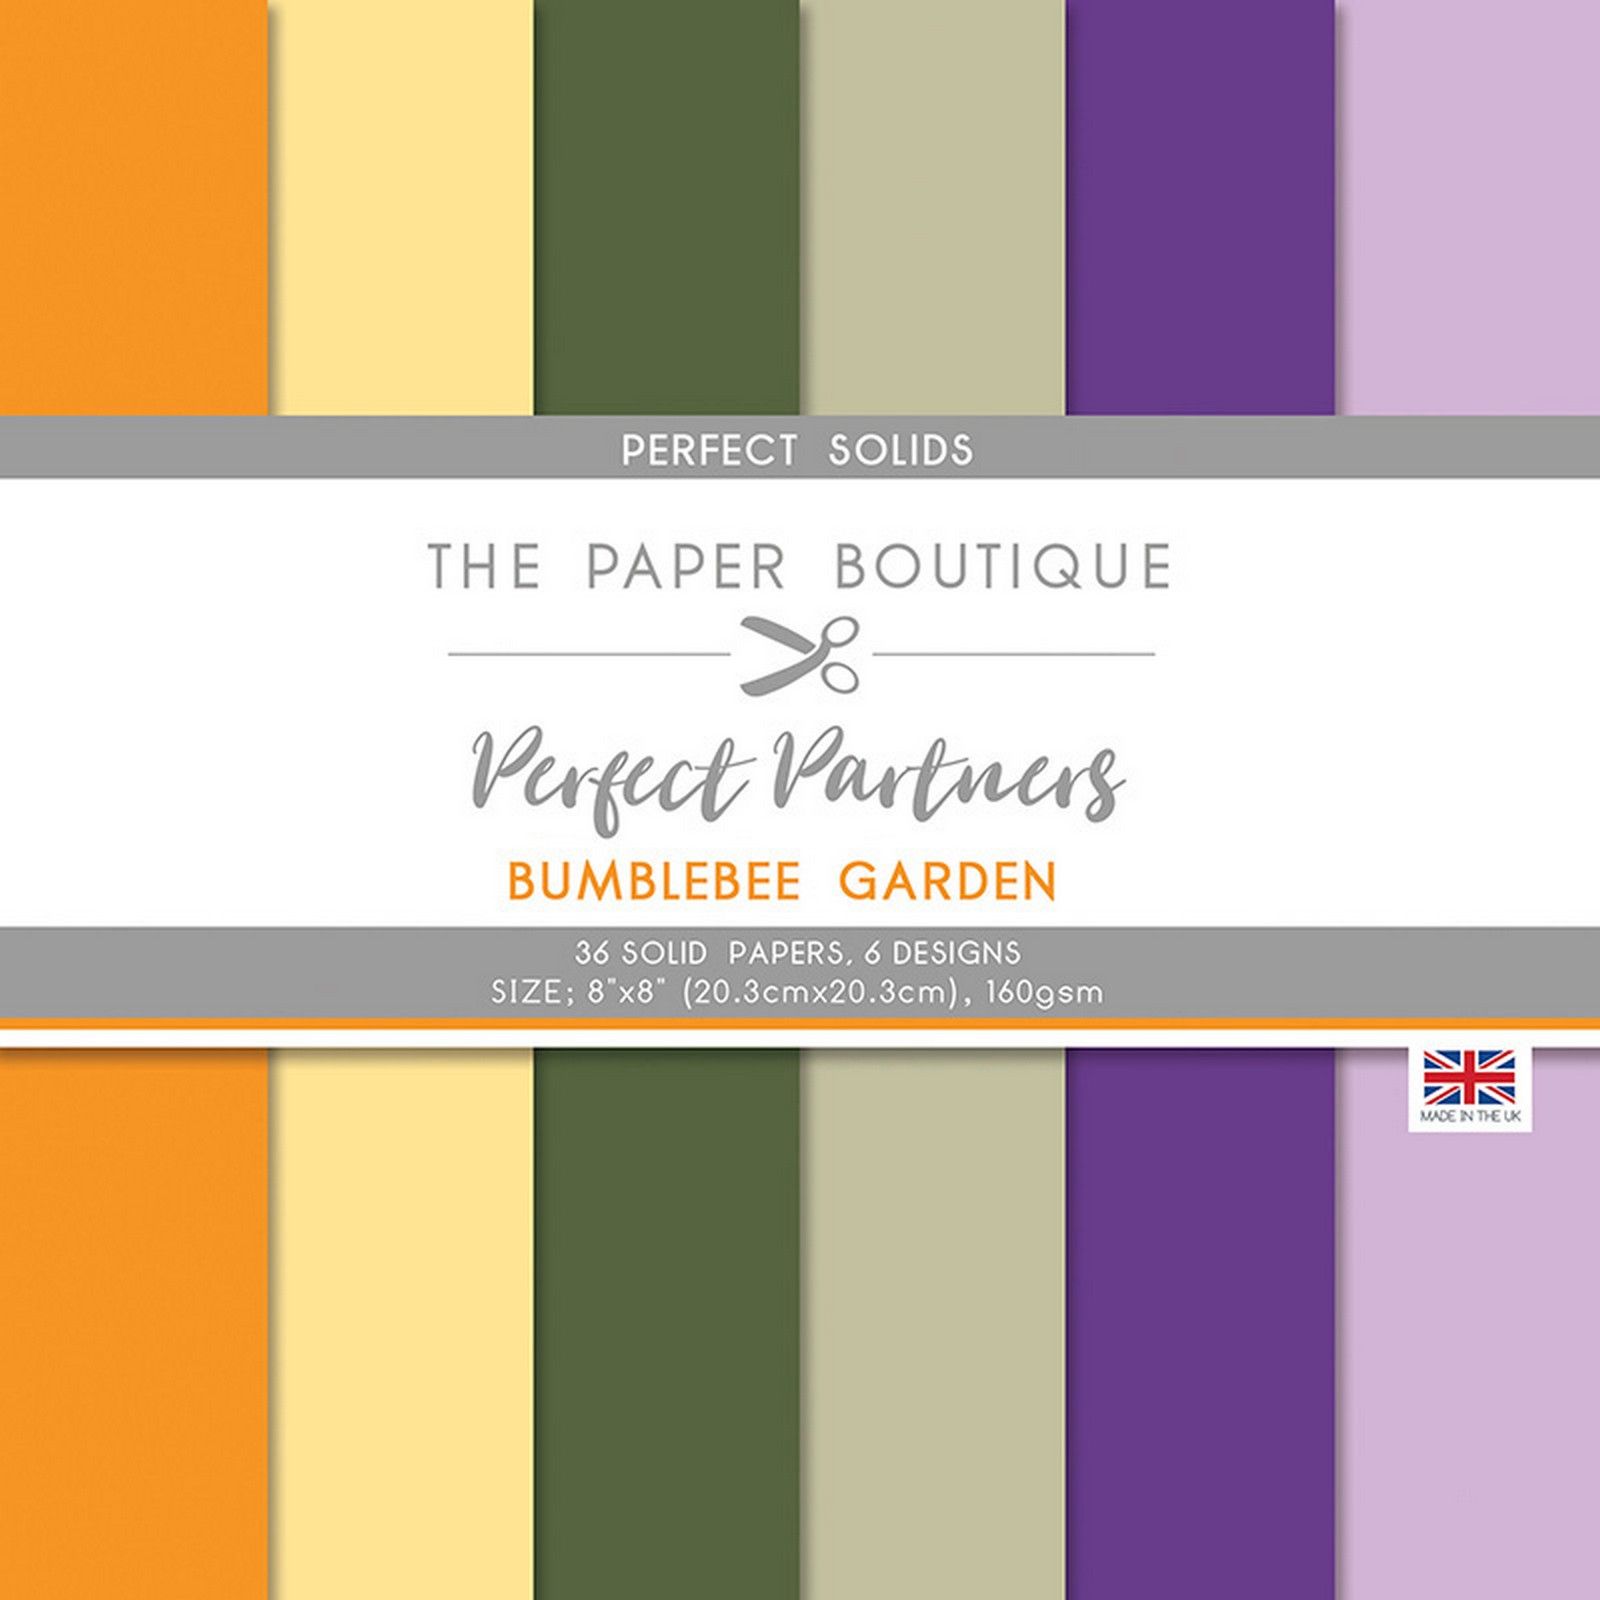 The Paper Boutique • Perfect partners Bumblebee garden perfect solids